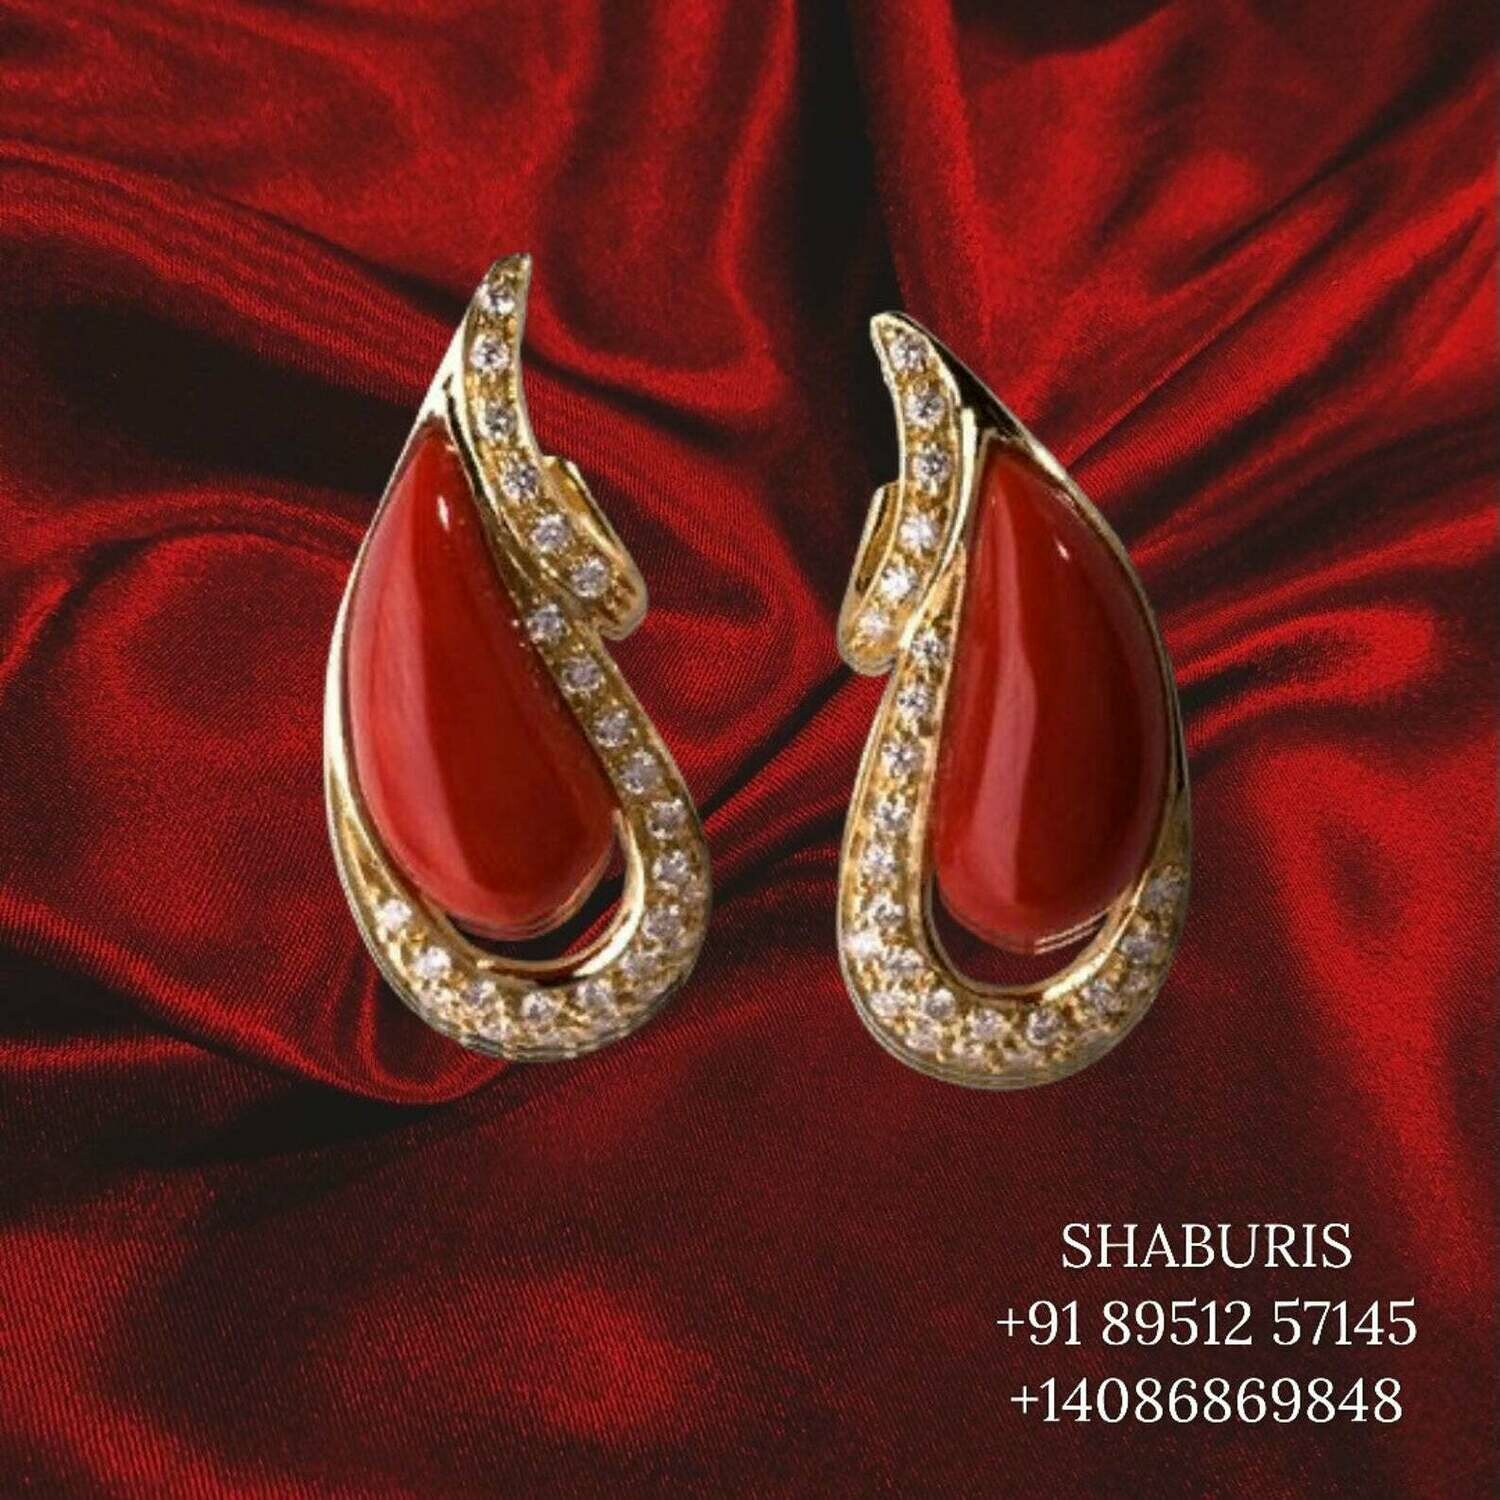 Coral Jewelry,Pure Silver jewelry Indian ,coral Earrings,simple Indian studs,Indian gold Jewelry designs-SHABURIS